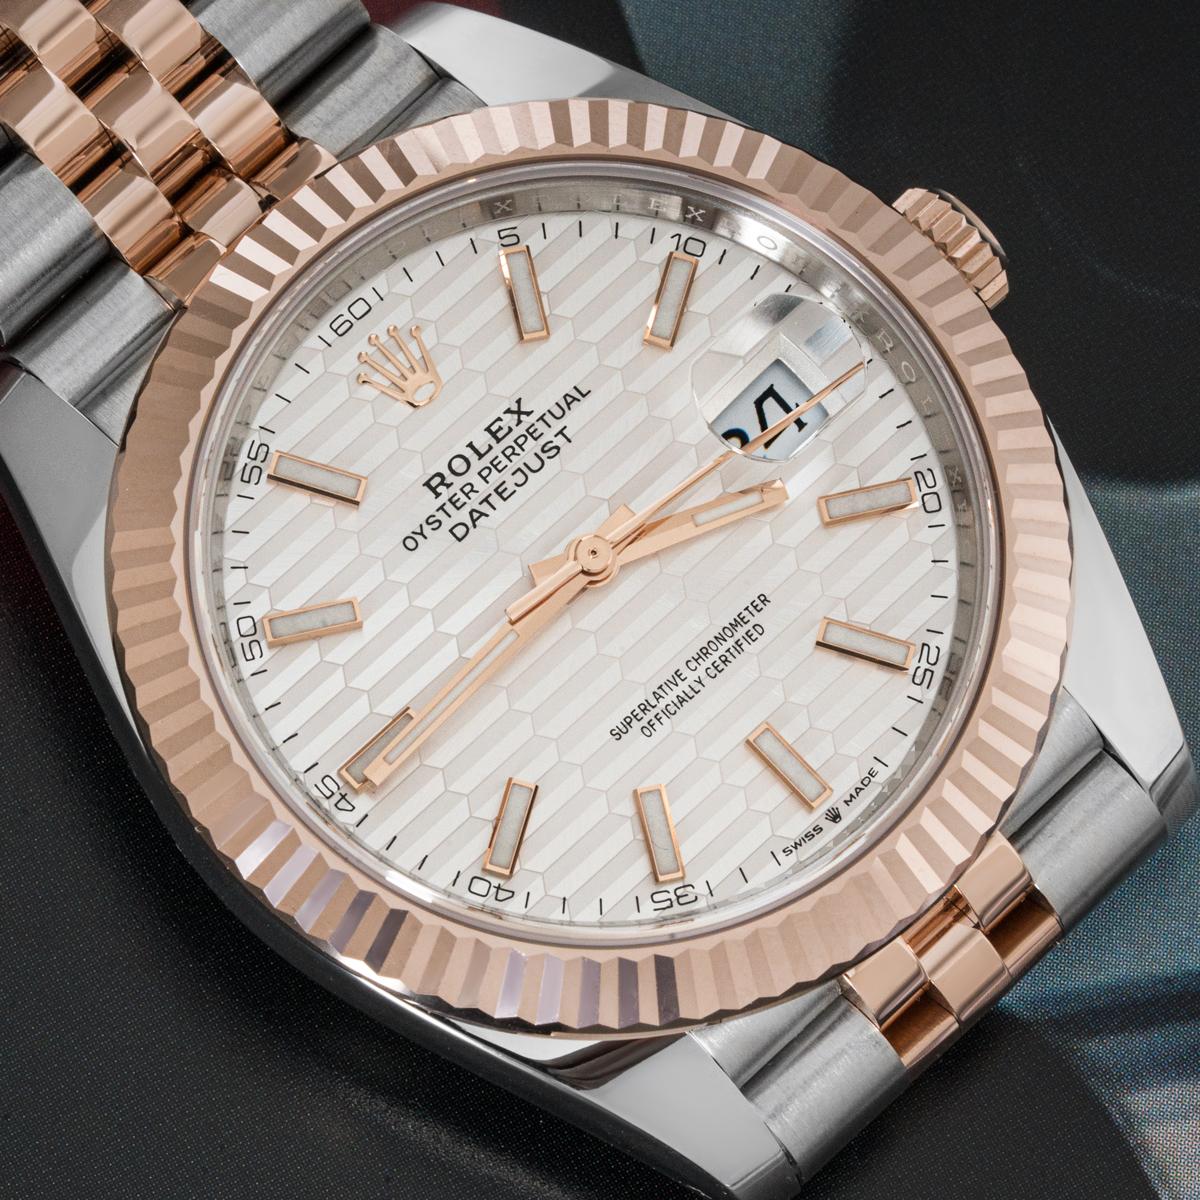 A 41mm Datejust in stainless steel and rose gold by Rolex. Featuring a distinctive silver fluted motif dial with applied hour markers and a fluted rose gold bezel.

The Jubilee bracelet is bound together by a folding Oysterclasp equipped with the